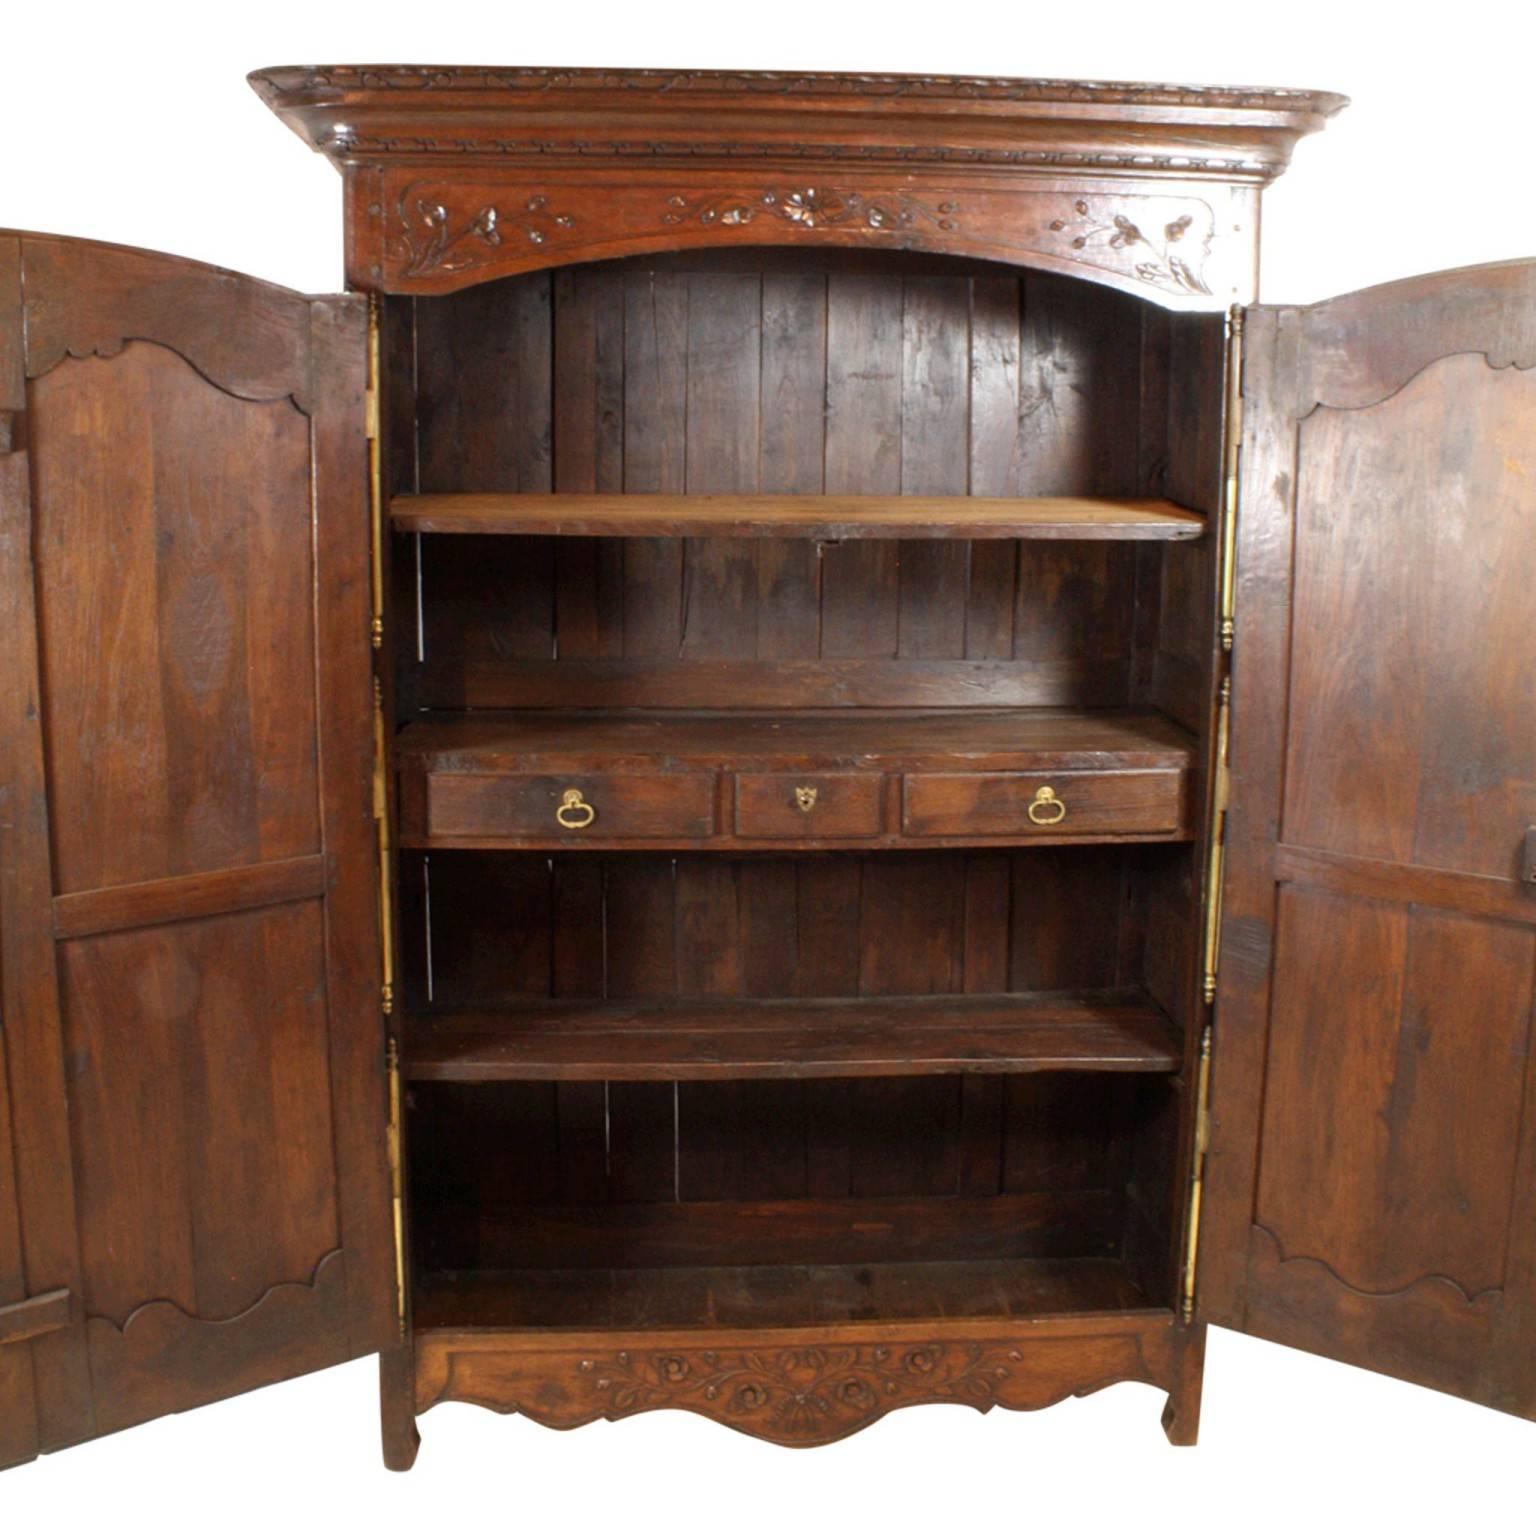 Dating from the mid-late 1700s, featuring three large brass hinges on each door, long detailed escutcheons, three interior shelves and three drawers, one with a key. Beautiful patina inside and out. The inside left door clasp and locking mechanism